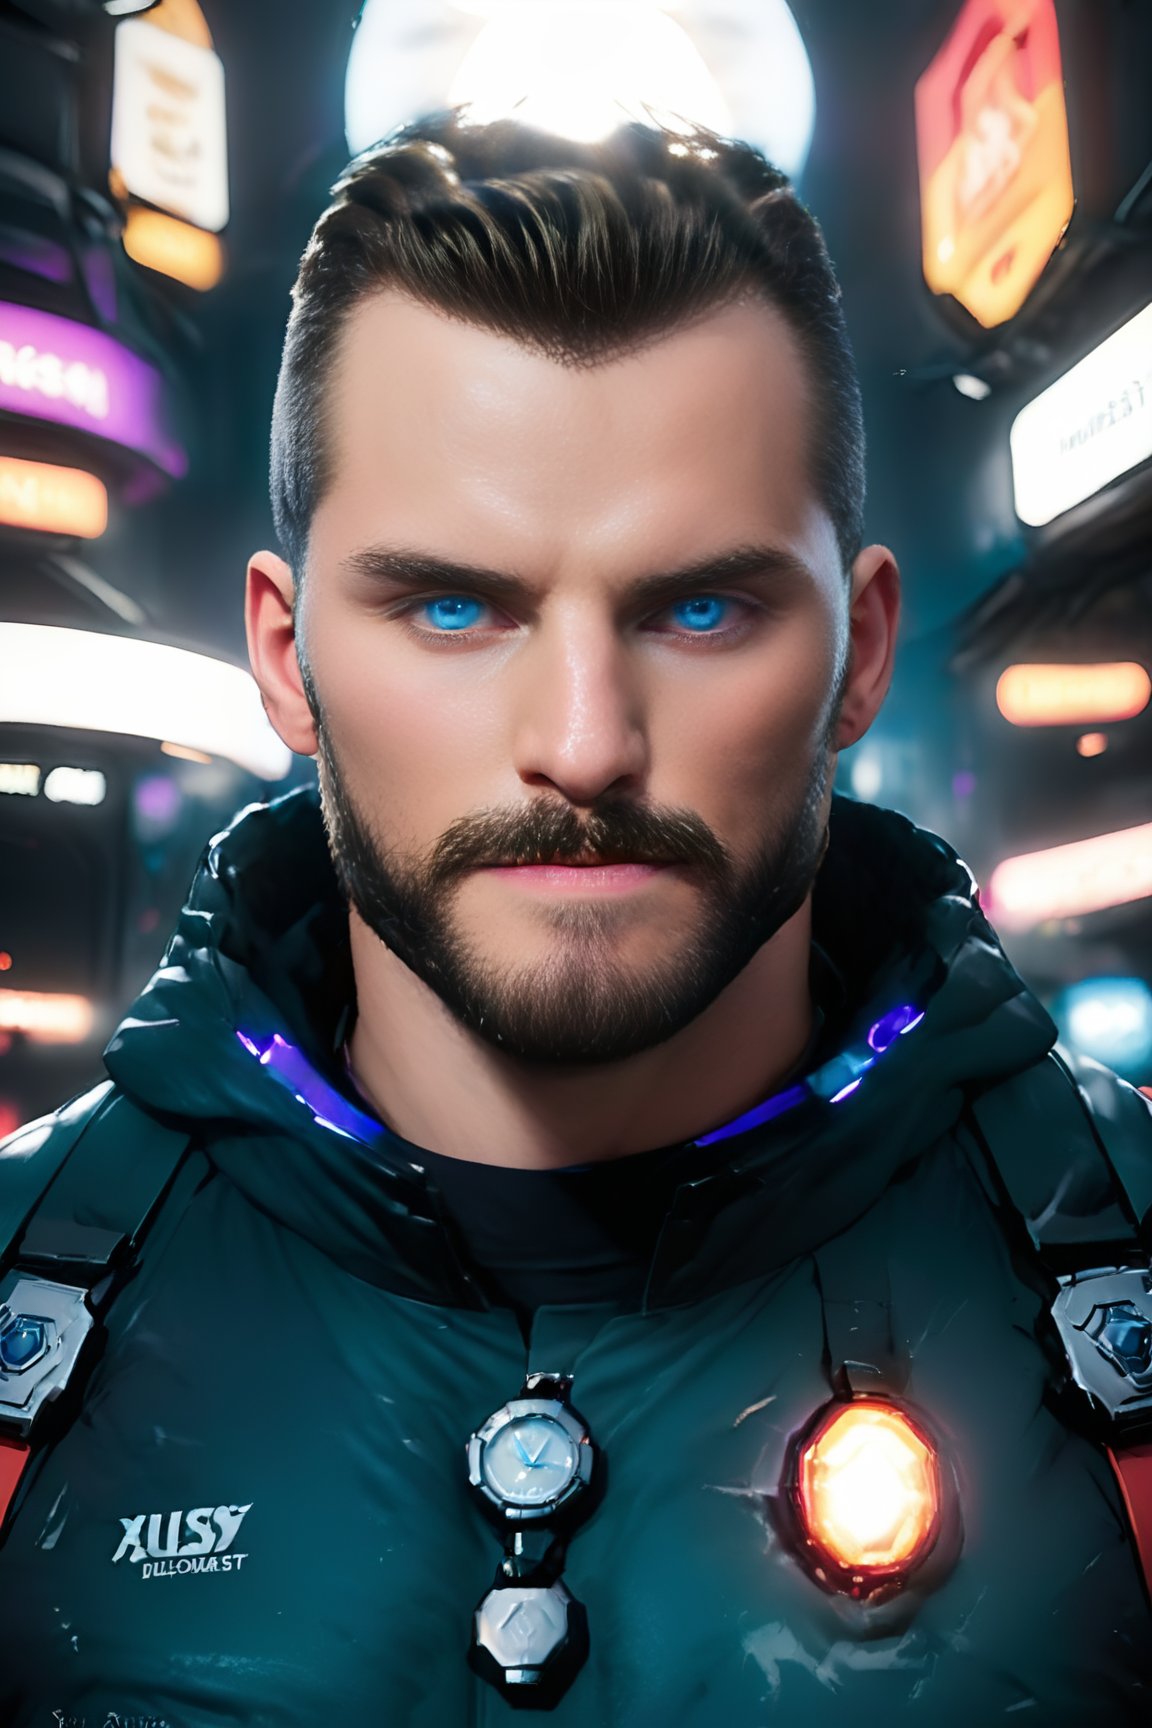  In this Unreal Engine 5 rendering, a telepath stands majestically, his piercing blue eyes aglow with semi-translucent quasar lightbeams (powered by ActionVFX) that dominate the viewer. His determined expression radiates mind-control as he wears a well-rendered purple illusionist's jacket refracting light through ray-tracing refractions. Strong cheekbones and a brown beard accentuate his jawline. The background is a surreal, intensely colorful lost forest in chiaoroscuro, where night and day blur. A powerful vignette intensifies focus on the mind-breaking male figure, set against an abyss of darkness. Powerful Illusionism rendered in Source Filmmaker (SFM) for extra Fantastic Realism breaking the molds of Realistic Dark Fantasy, falk0man